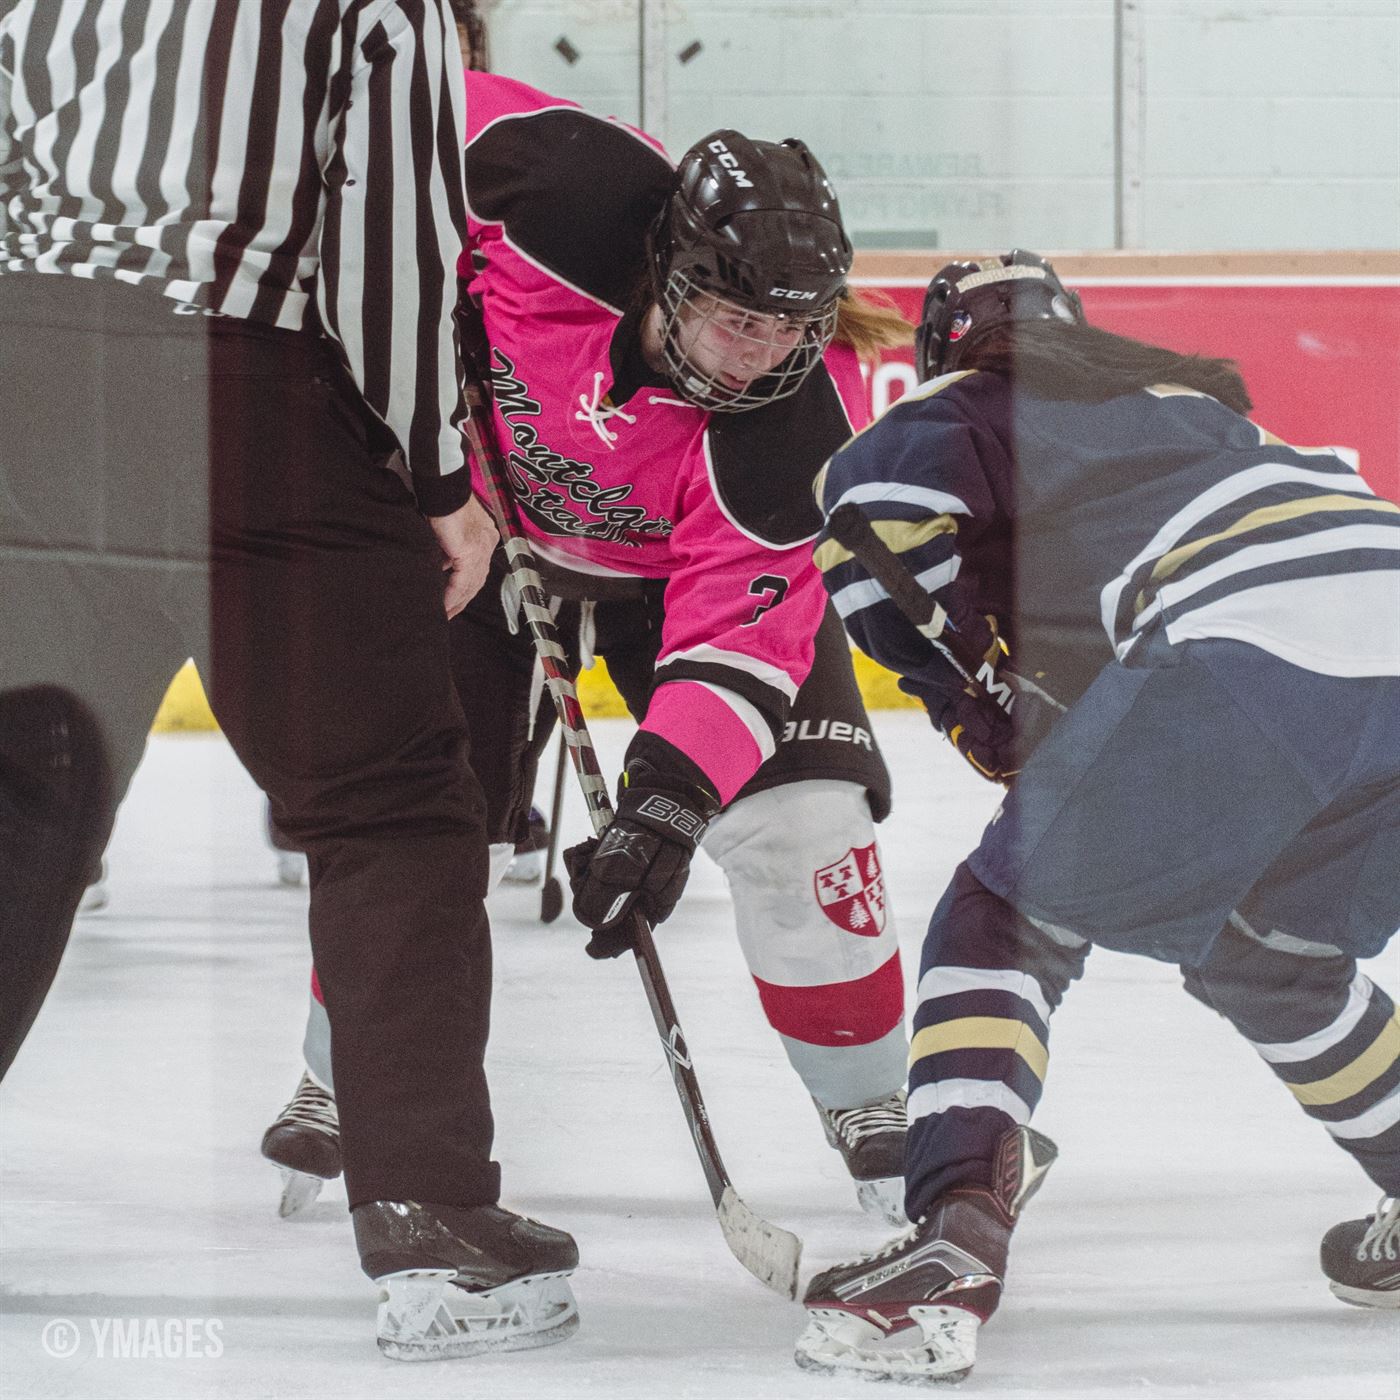 Emily Struble (pink jersey) is one of the few veterans on this younger Montclair State women's ice hockey team. Photo courtesy of Yazemin Yilmaz